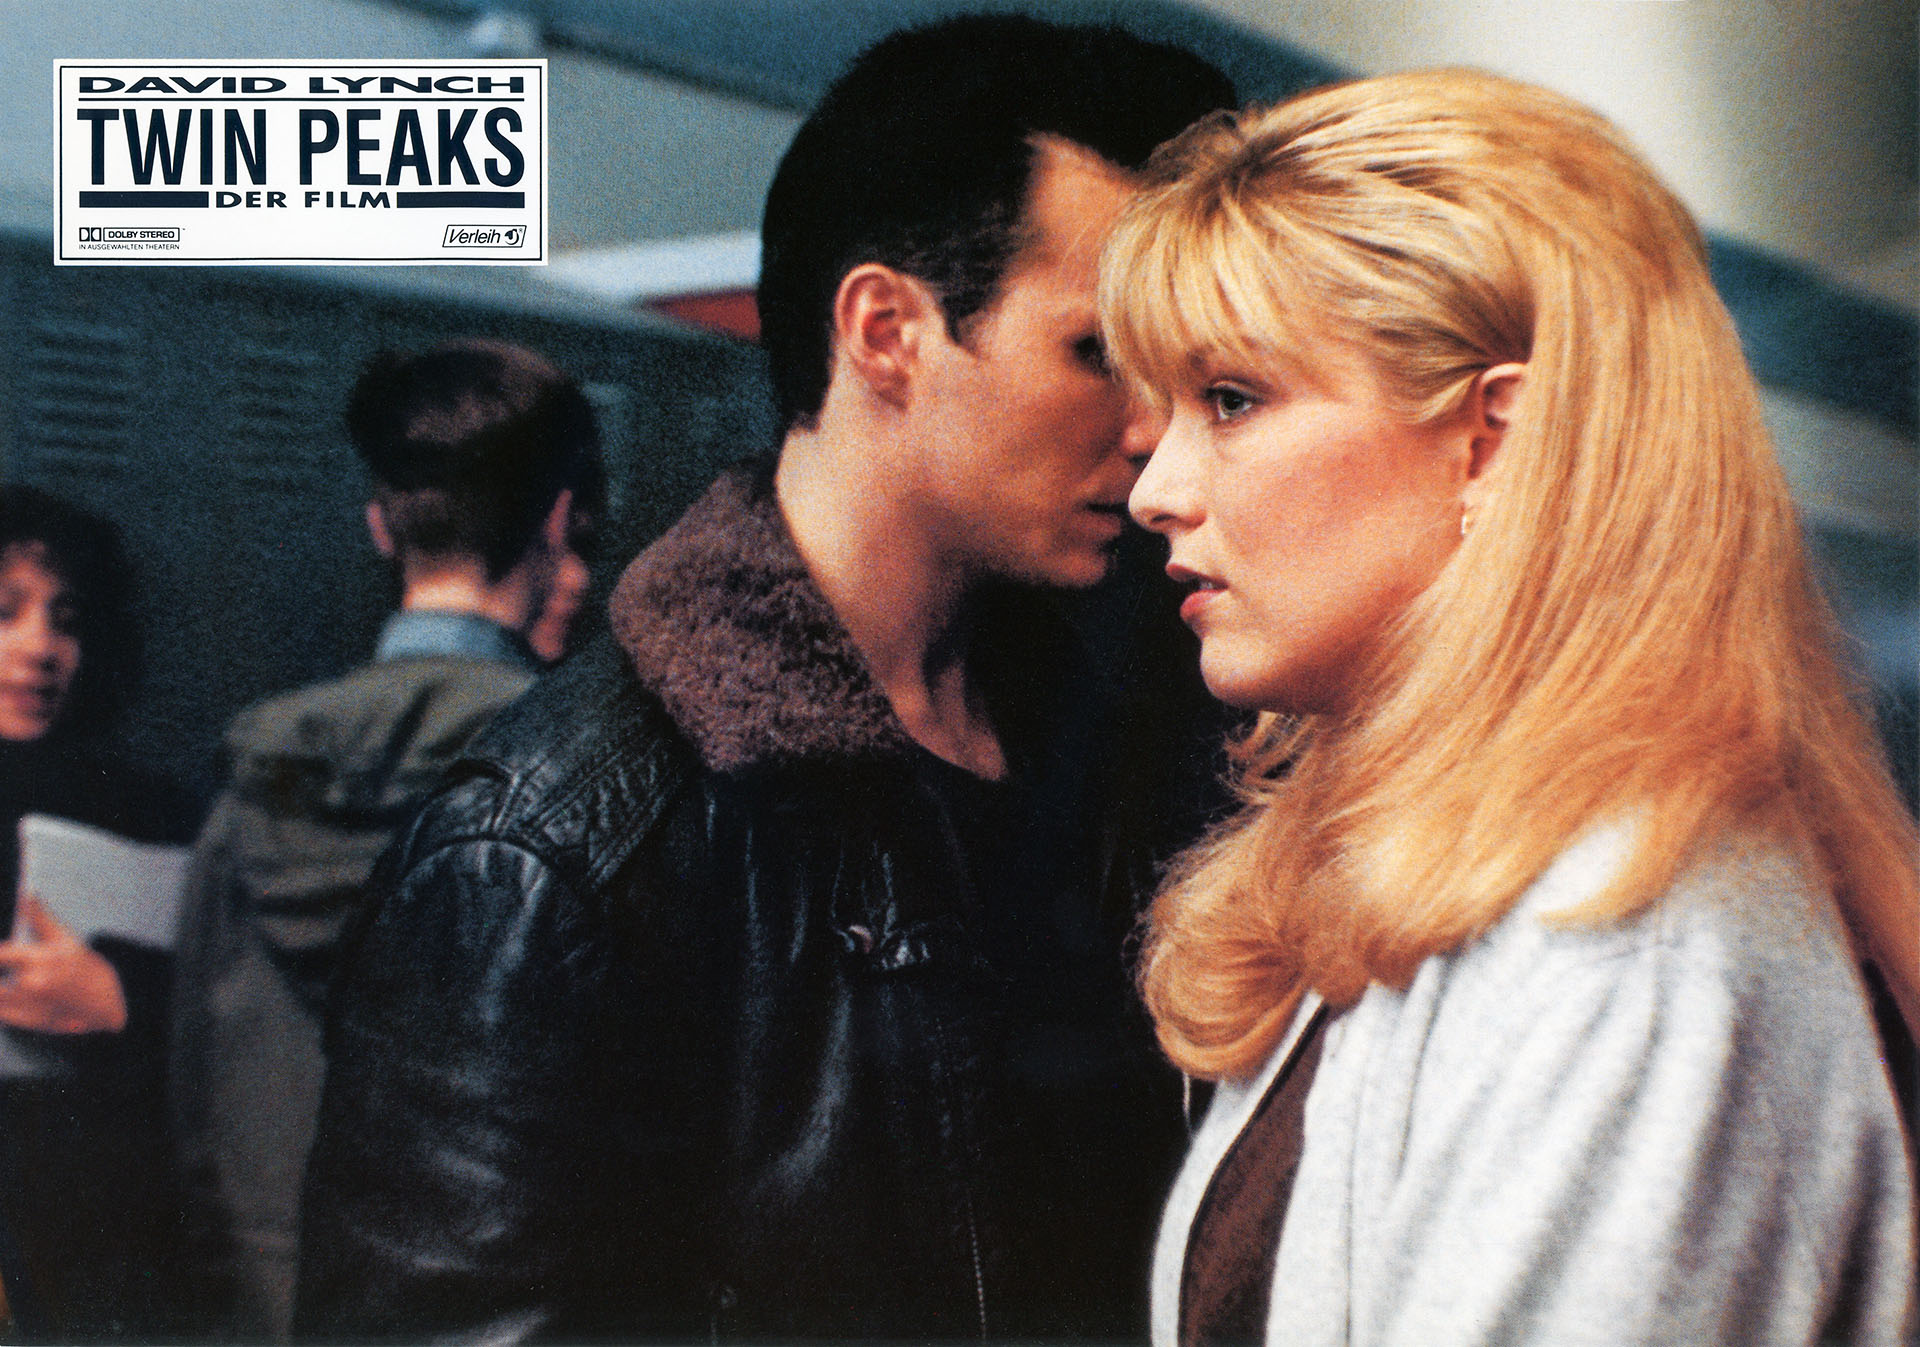 Twin Peaks: Fire Walk With Me Lobby Card from Germany featuring James Hurley walking by Laura Palmer in high school.